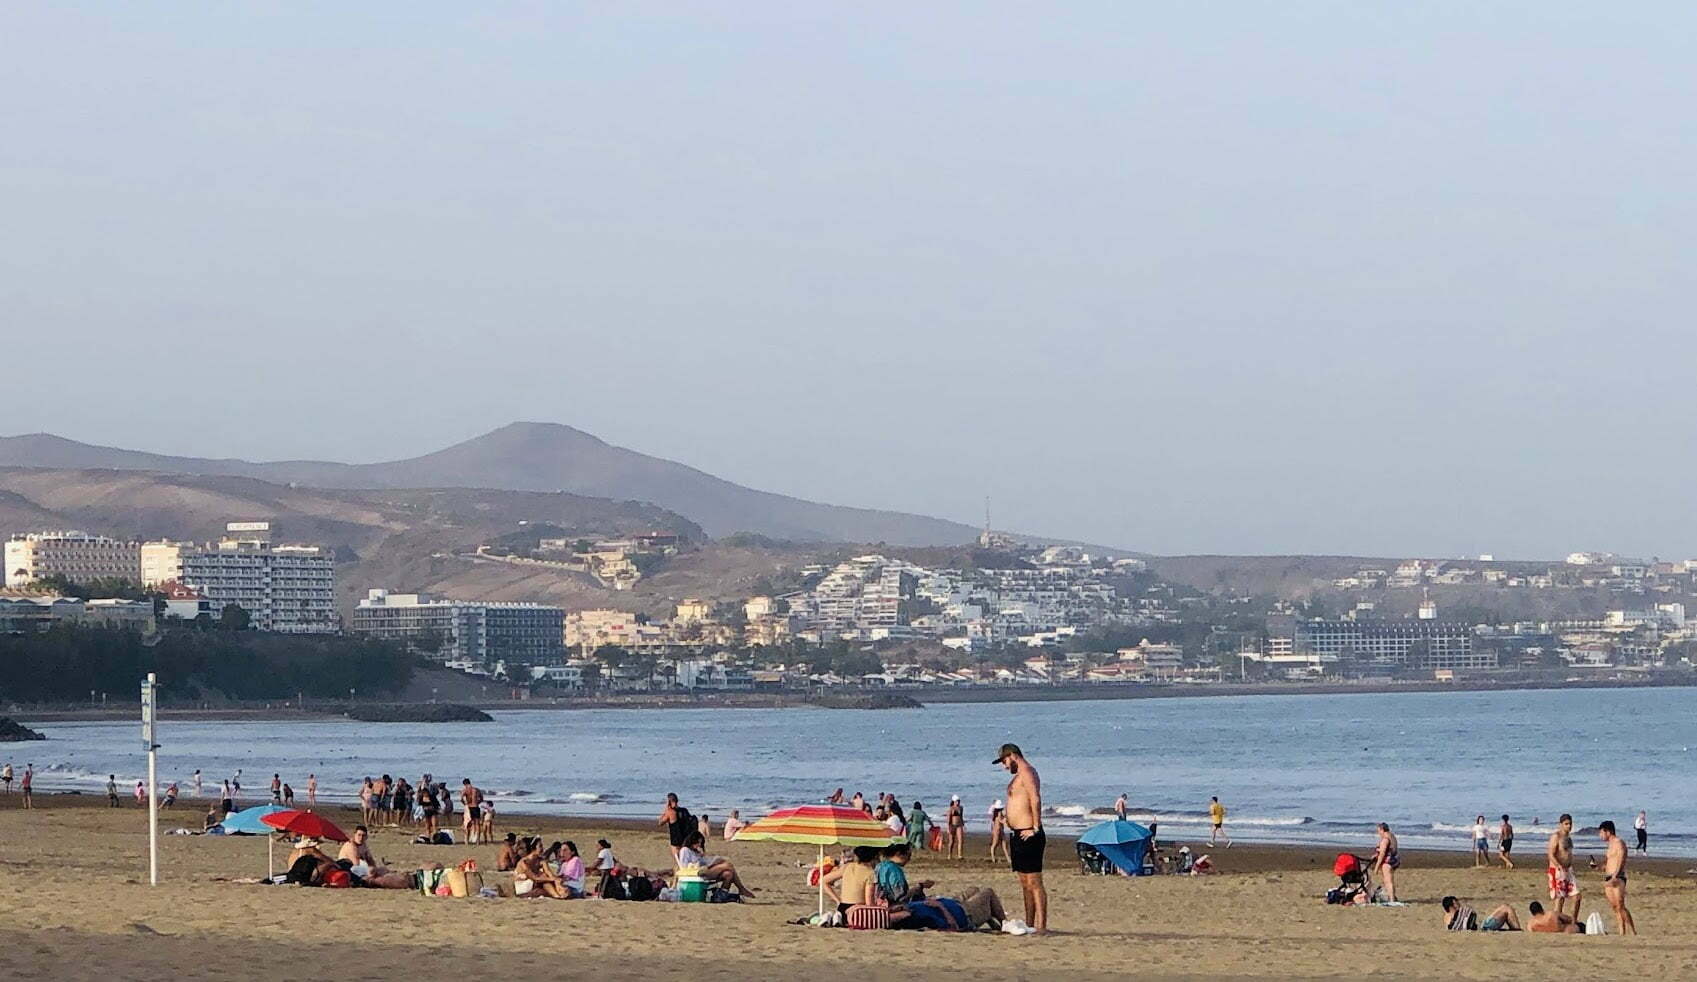 Canary Islands exceeds a monthly total of one million tourists for the first time following the start of the pandemic